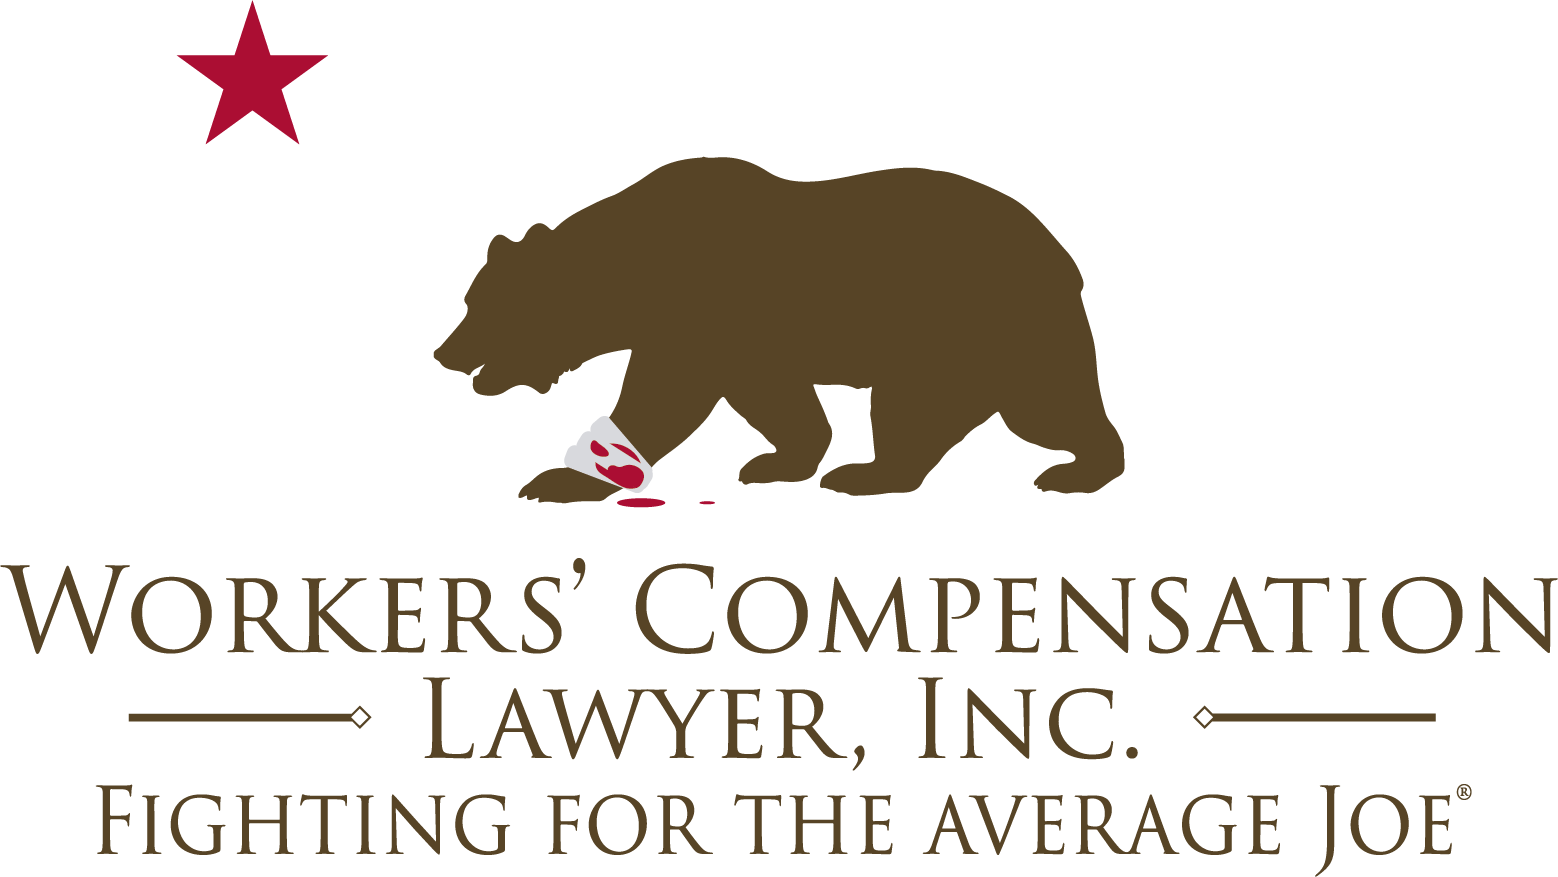 Workers’ Compensation Lawyer, Inc.